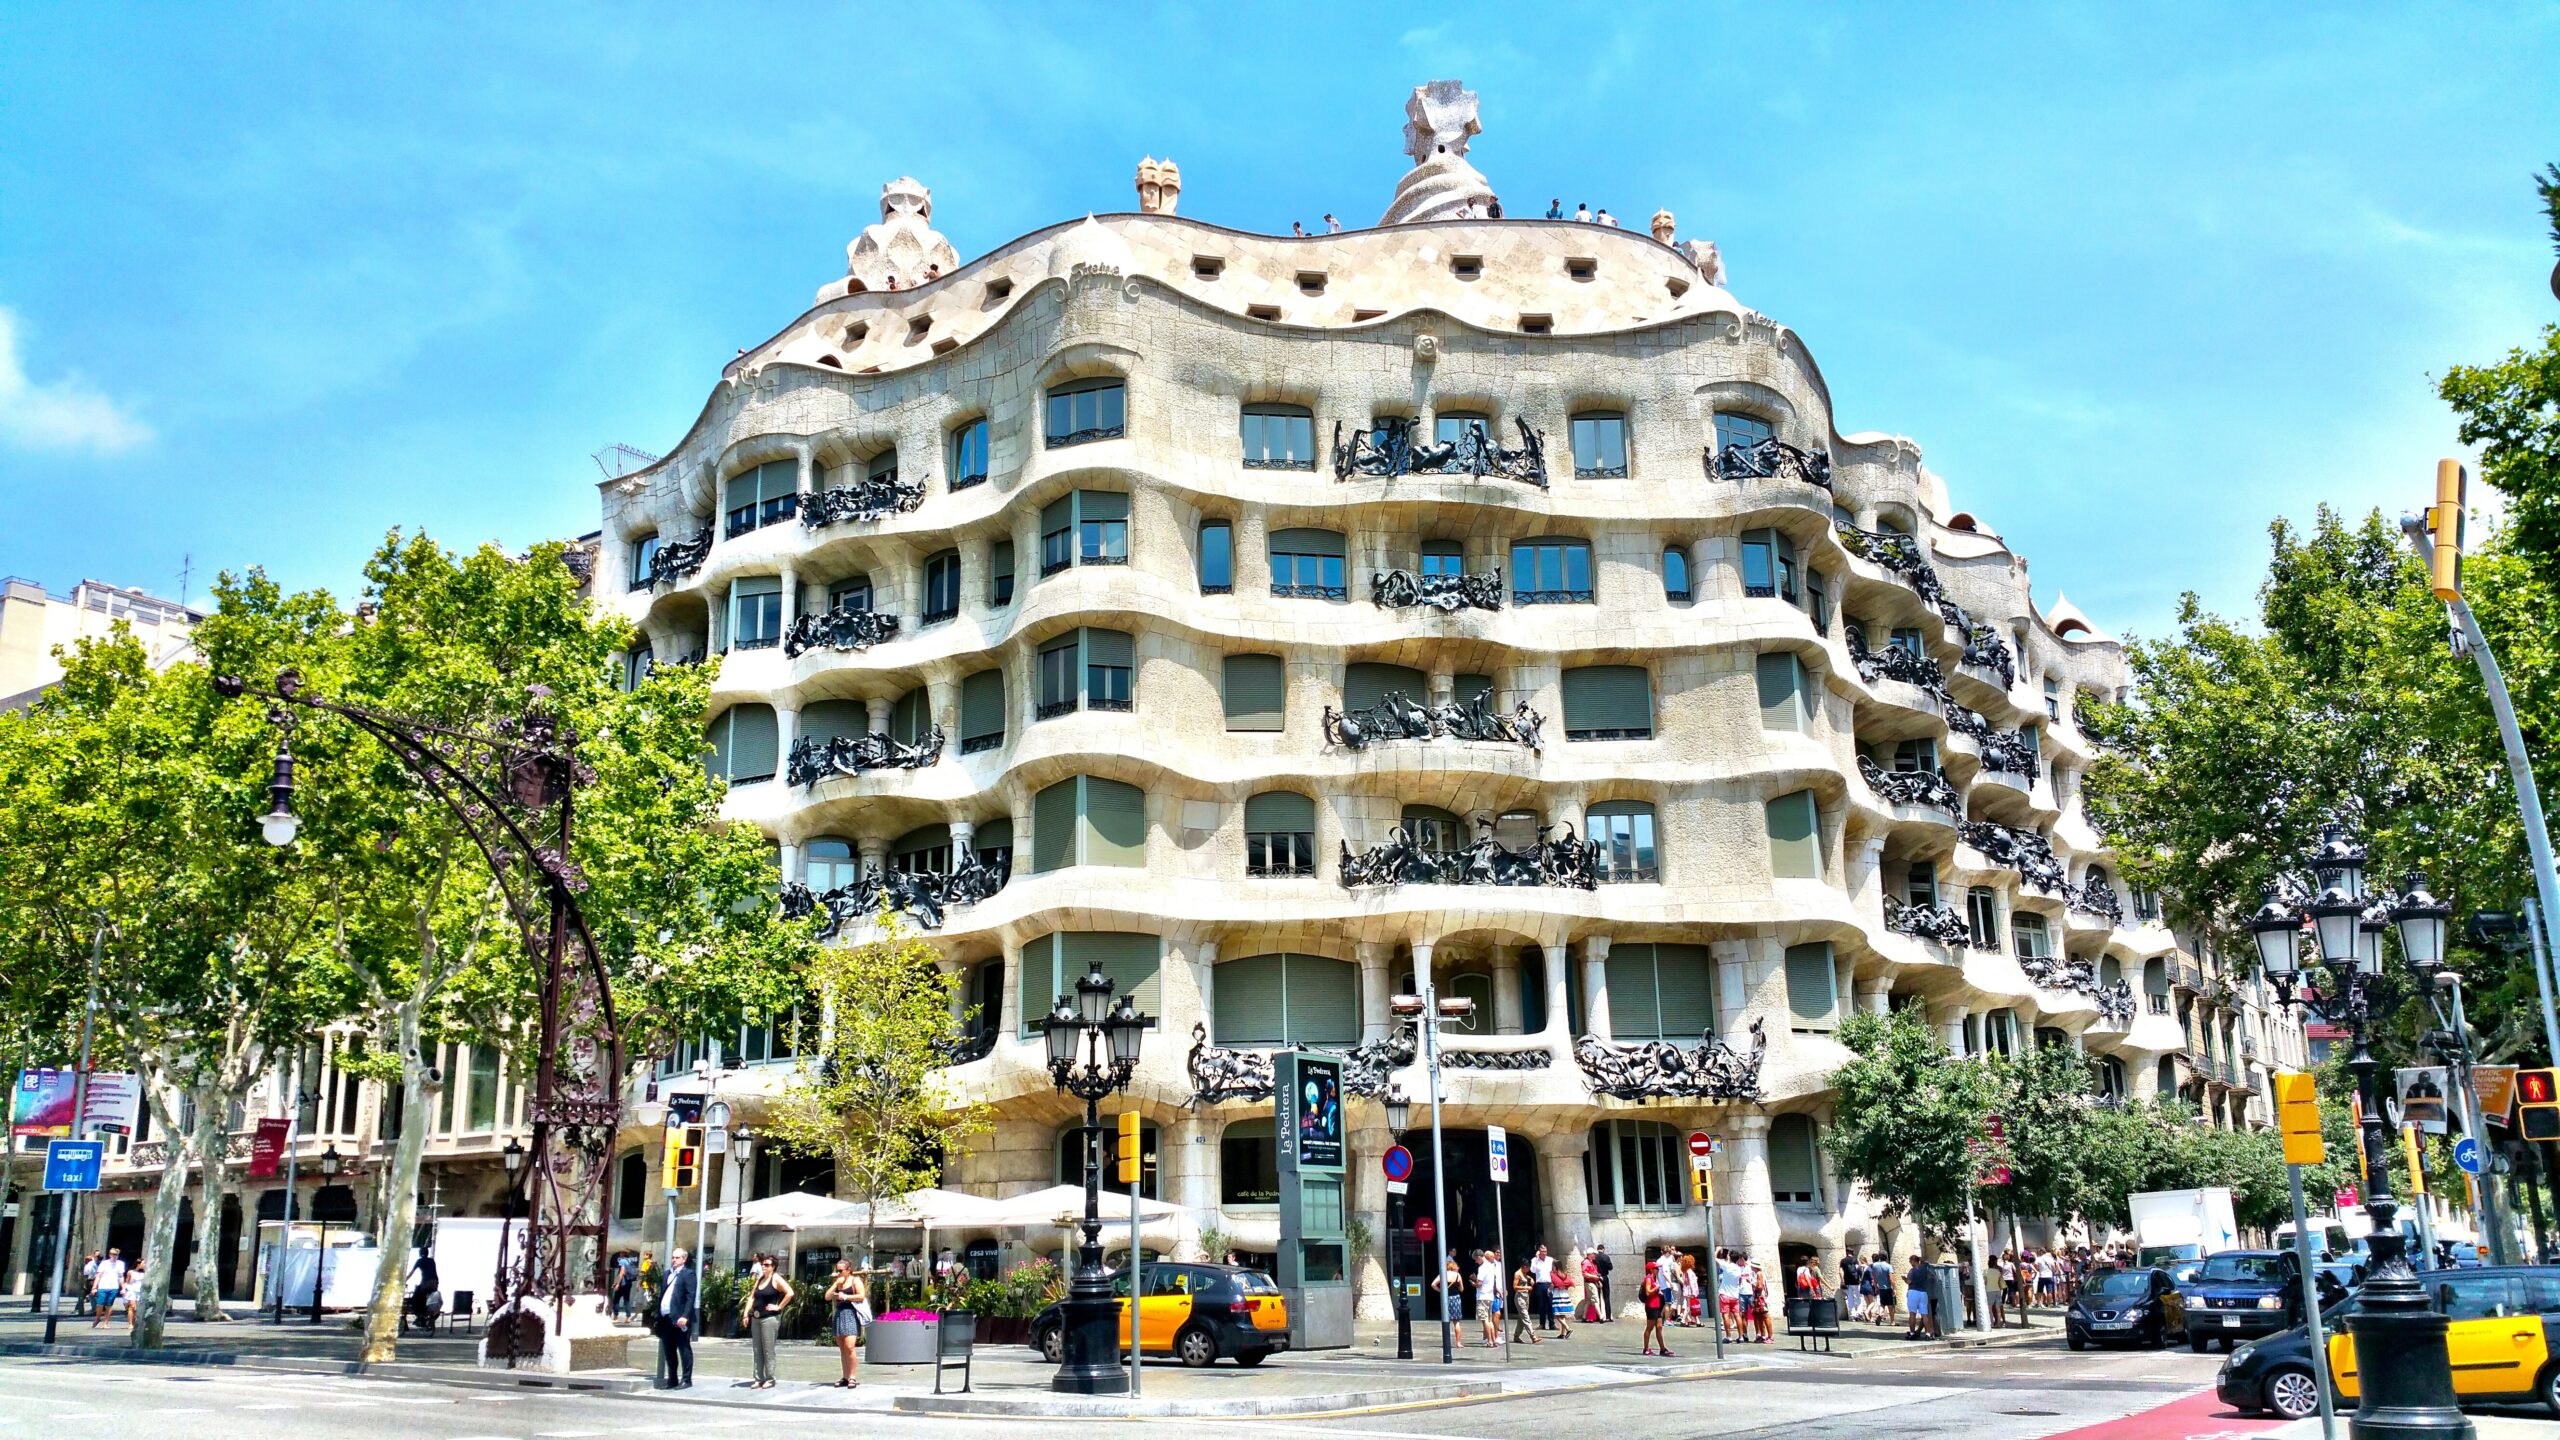 Casa Mila with busy traffic on a sunny day